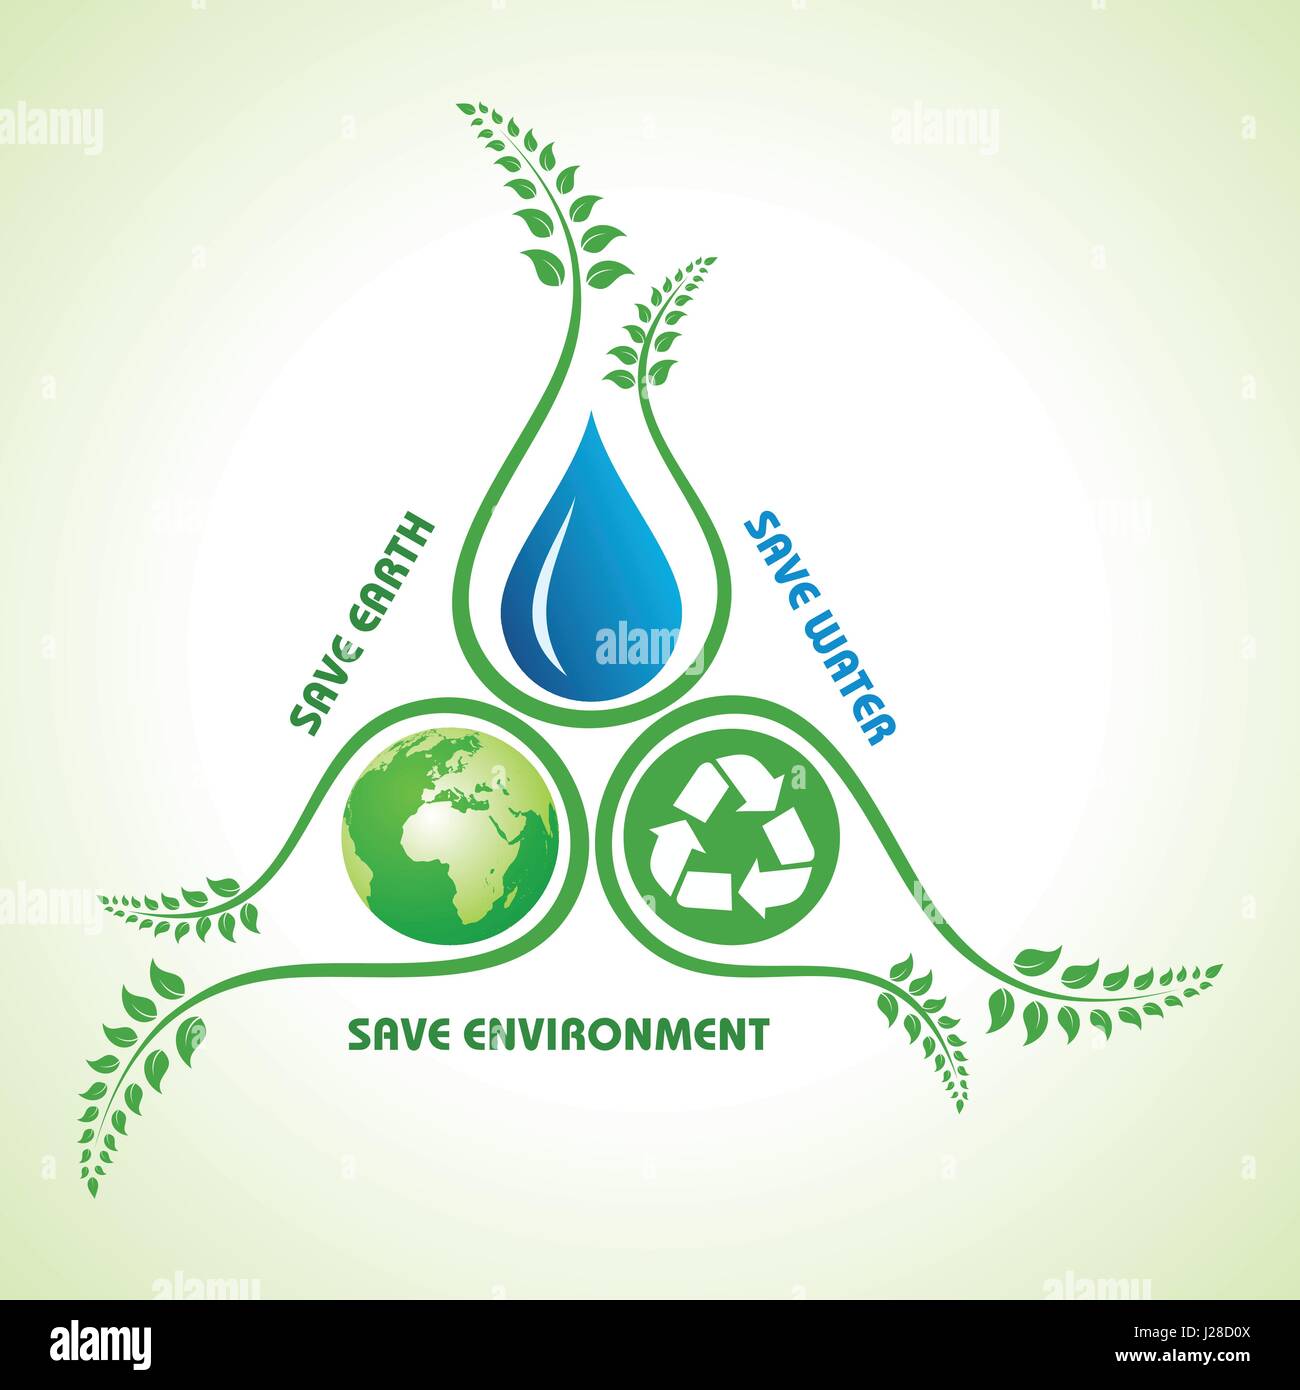 Save earth,water and environment concept stock vector Stock Vector ...